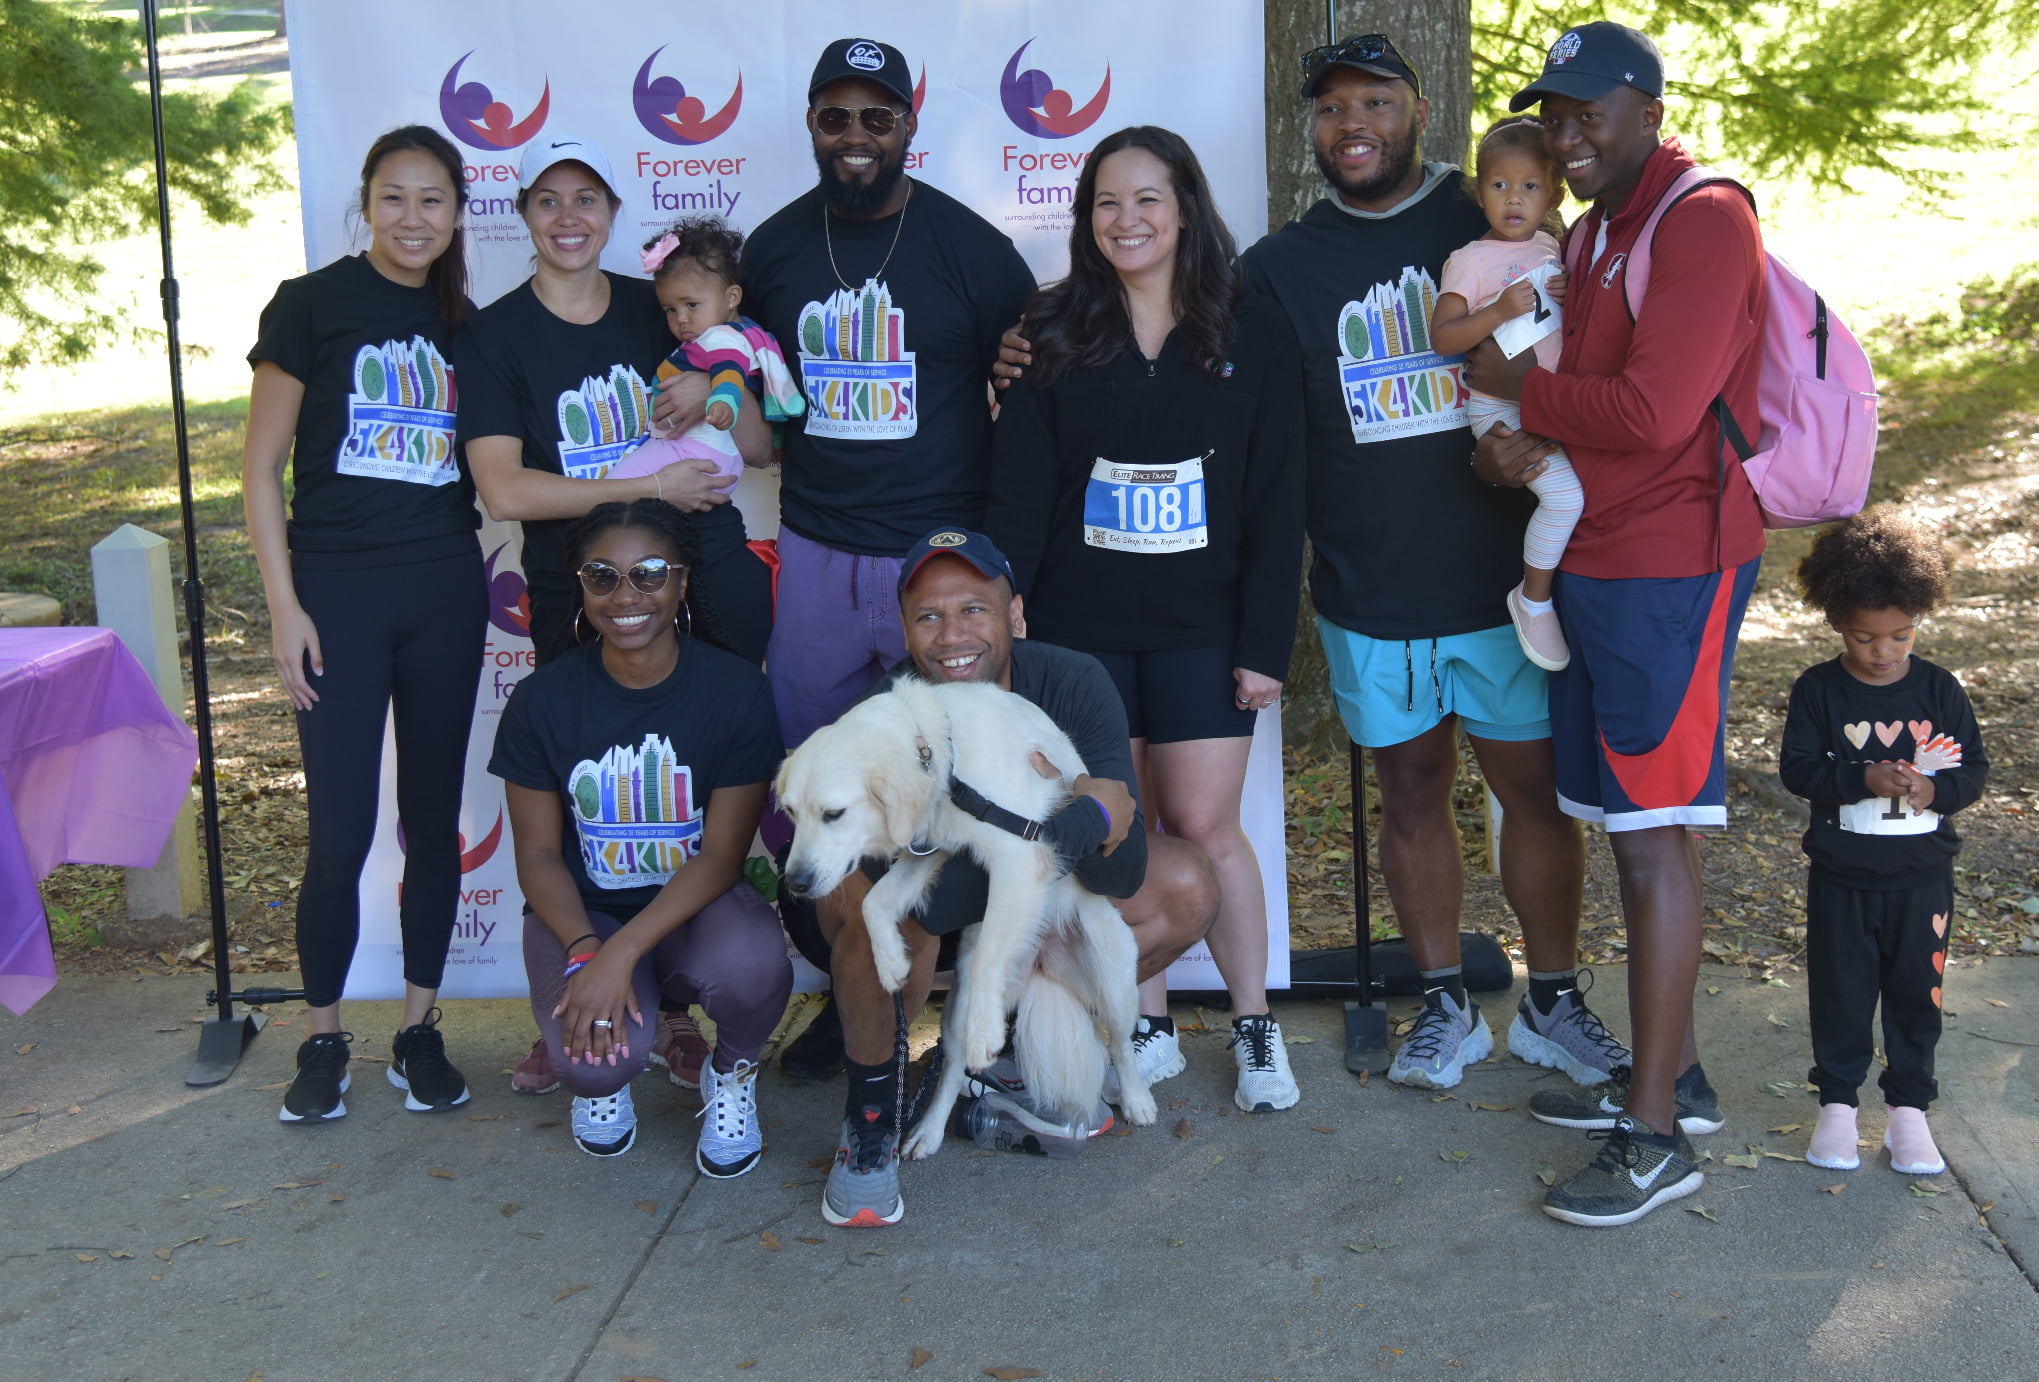 Diverse group of 8 adults, 2 toddlers, and a white dog posing outside in front of the Forever Family 5k run banner.